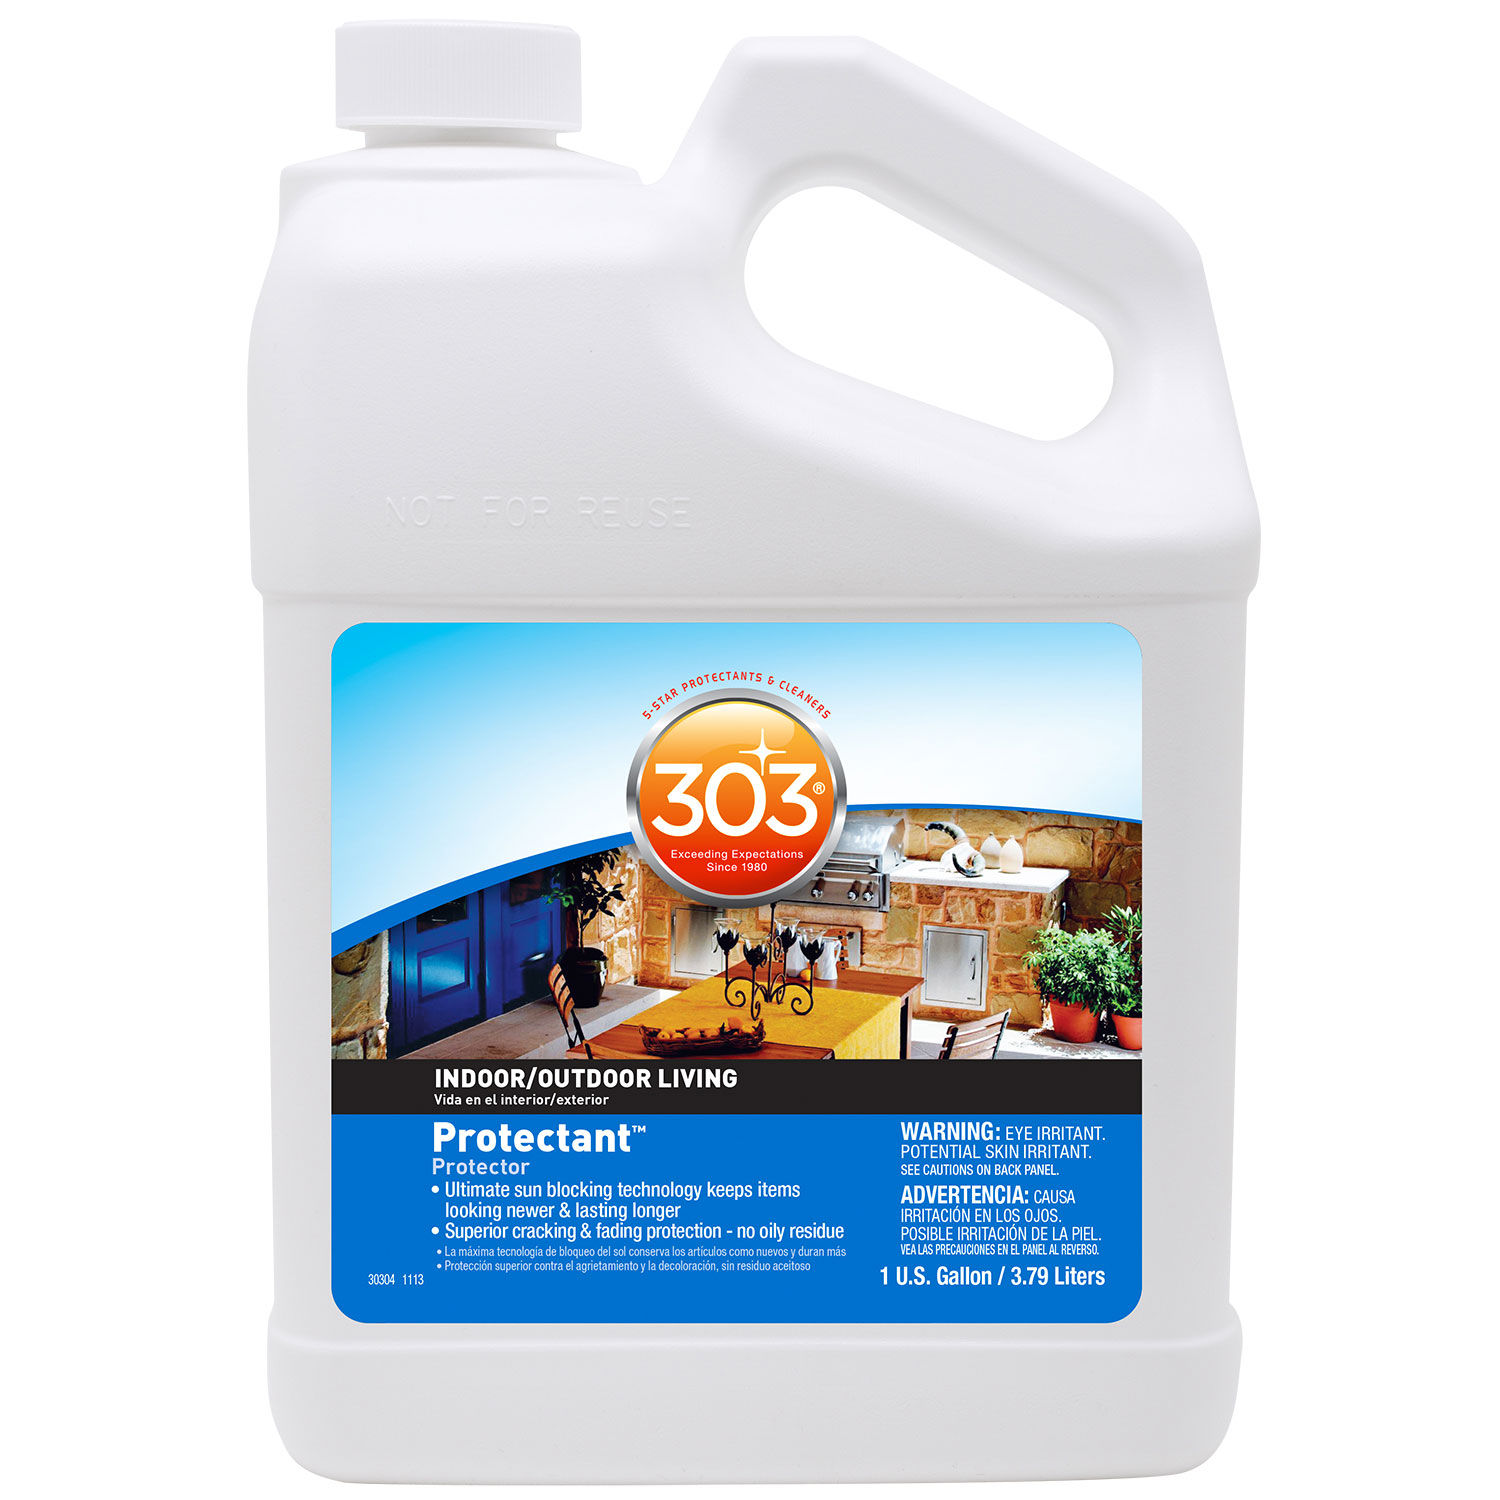 Cleaning Product, 303, Protectant, 1 Gallon Refill